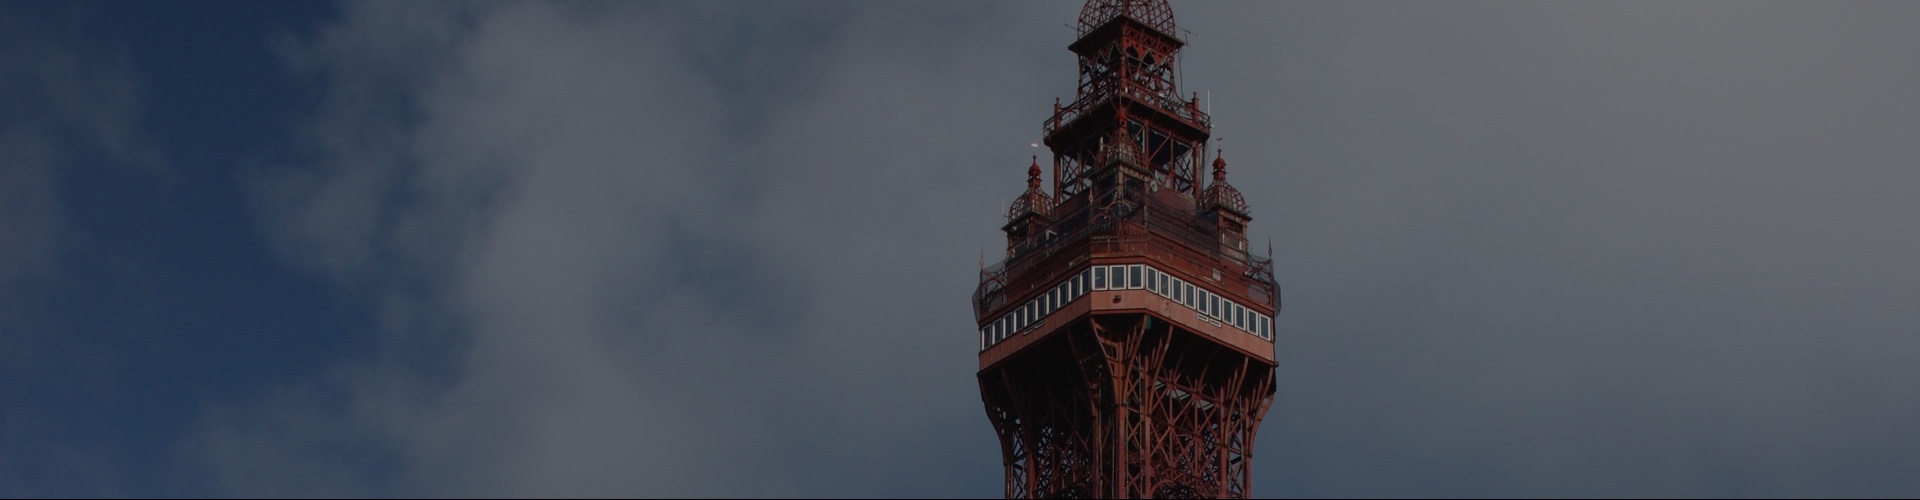 Top of the Blackpool Tower close up